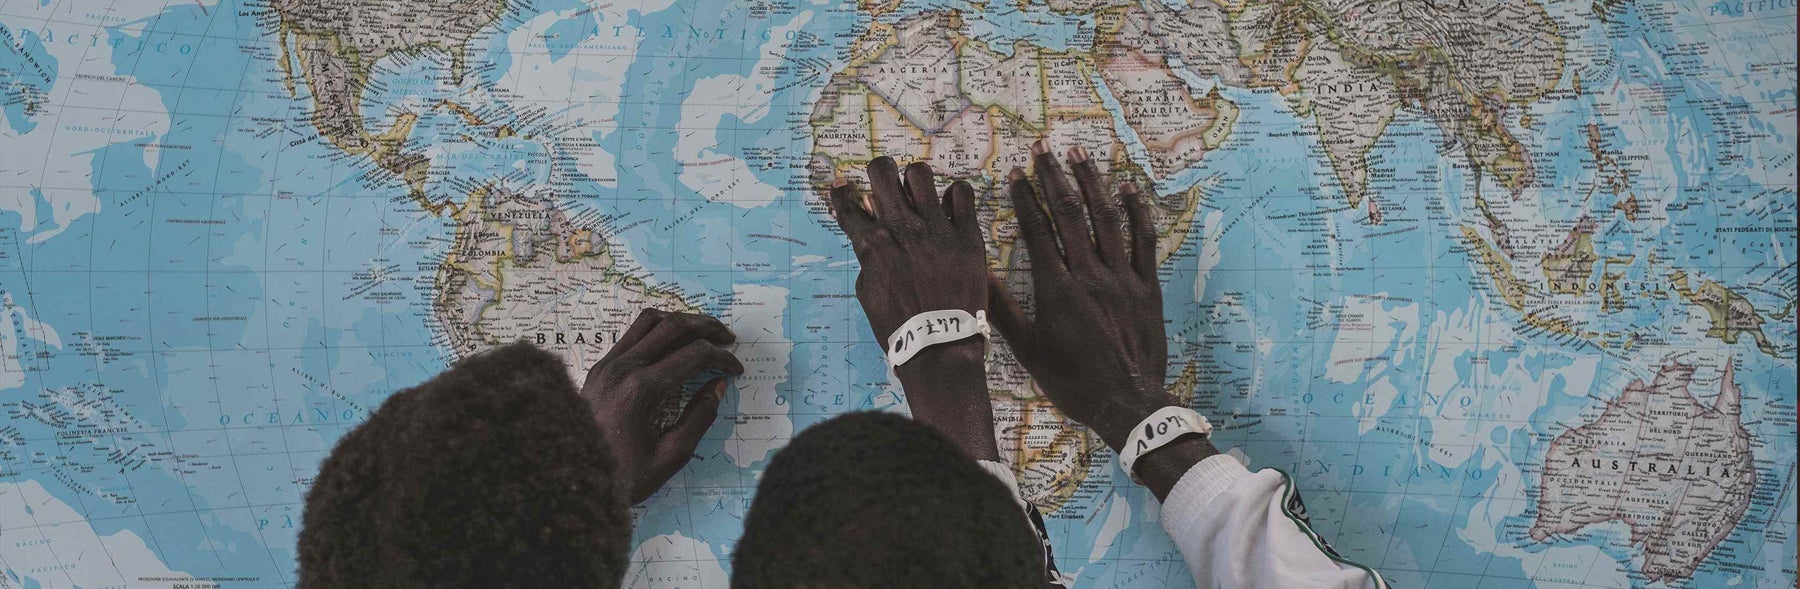 Hands pointing to Africa on a world map.